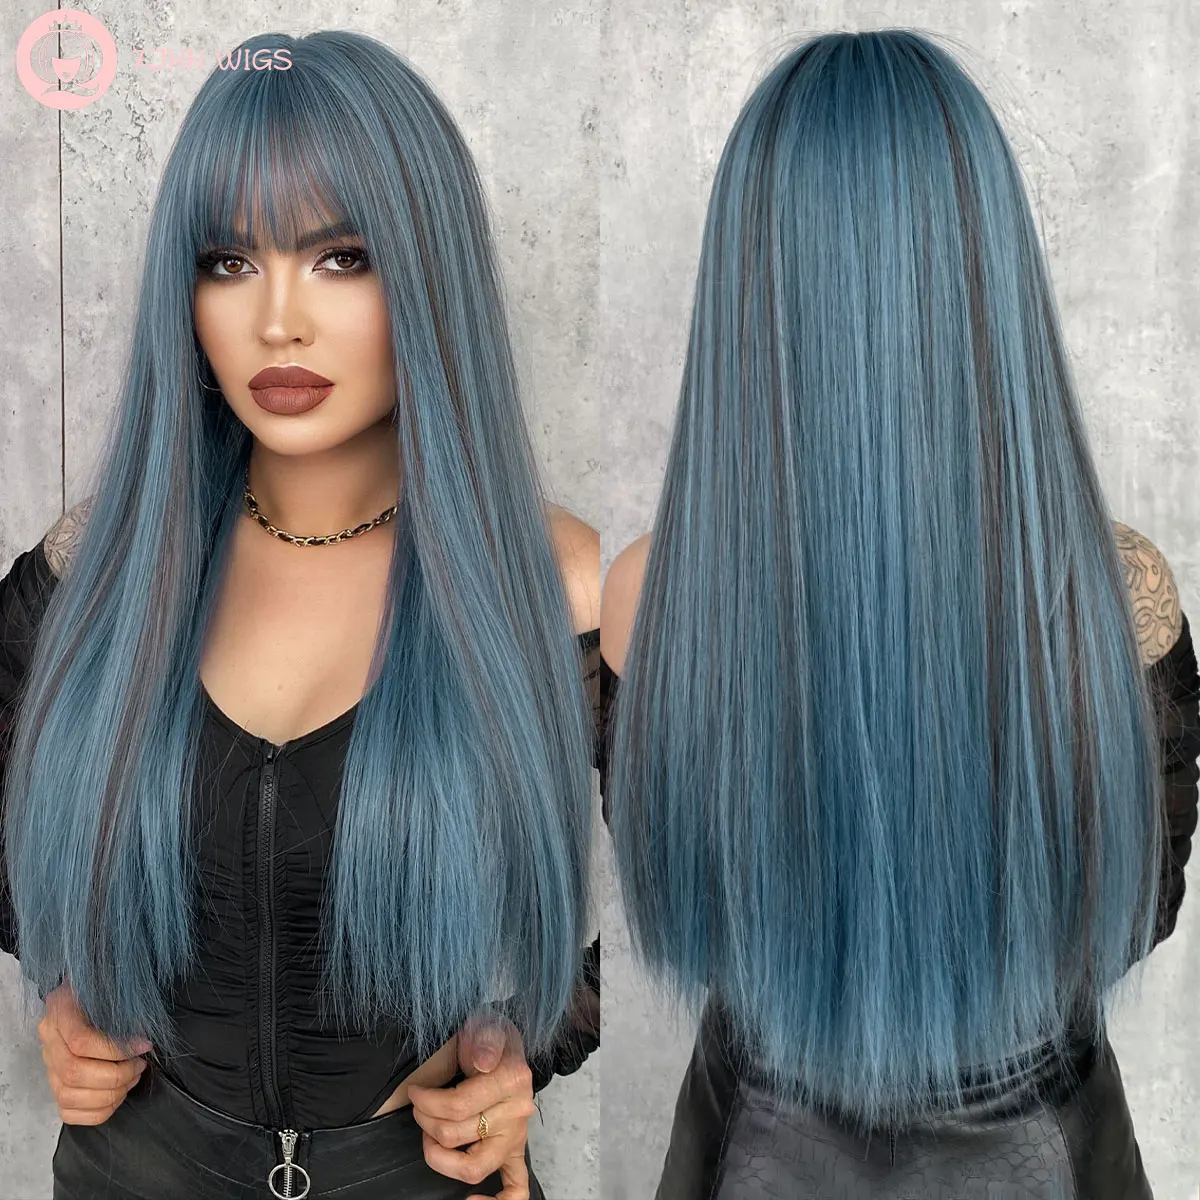 7JHH WIGS Highlight Blue Wig for Woman Daily Party Long Straight Hair Wigs with Bangs Natural Synthetic Wig Heat Resistant